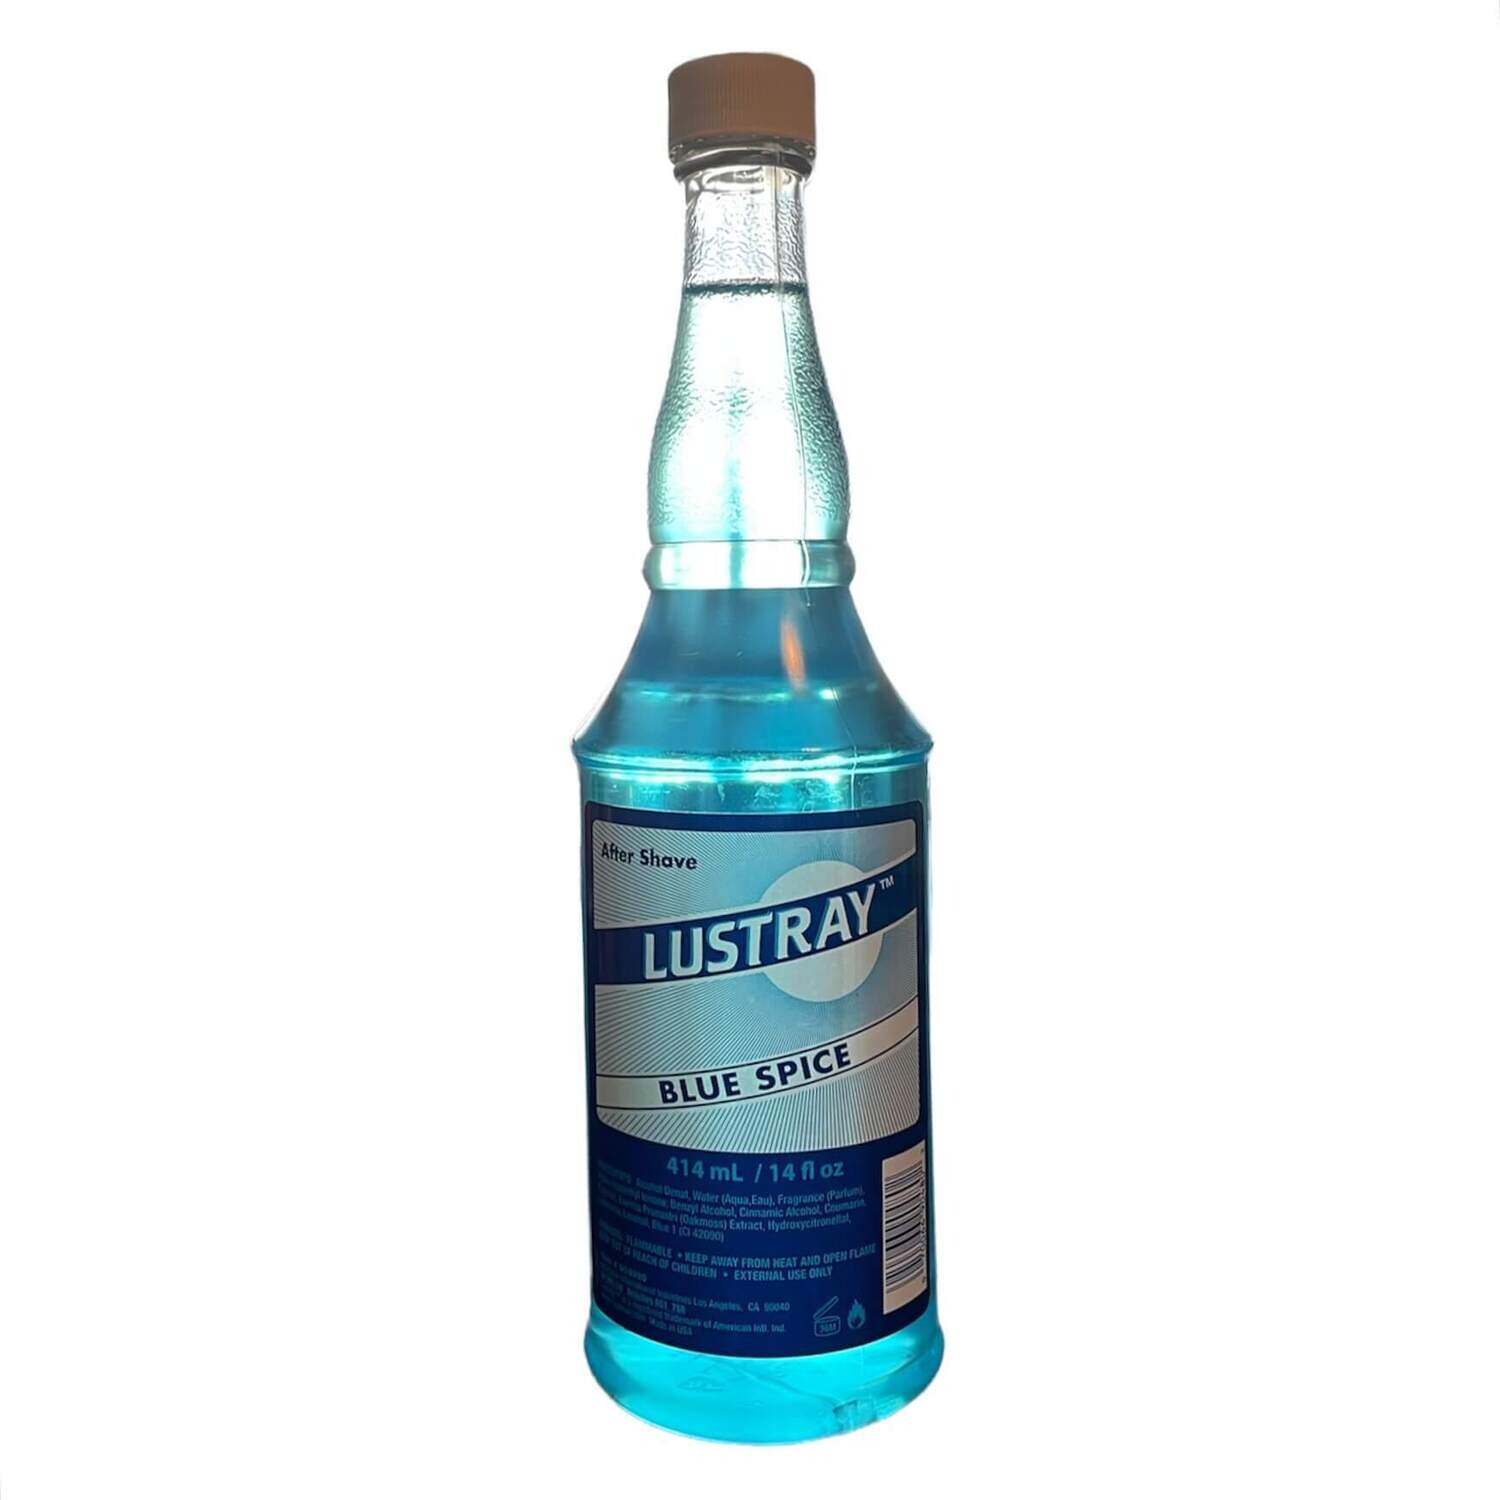 Lustray Blue Spice After Shave